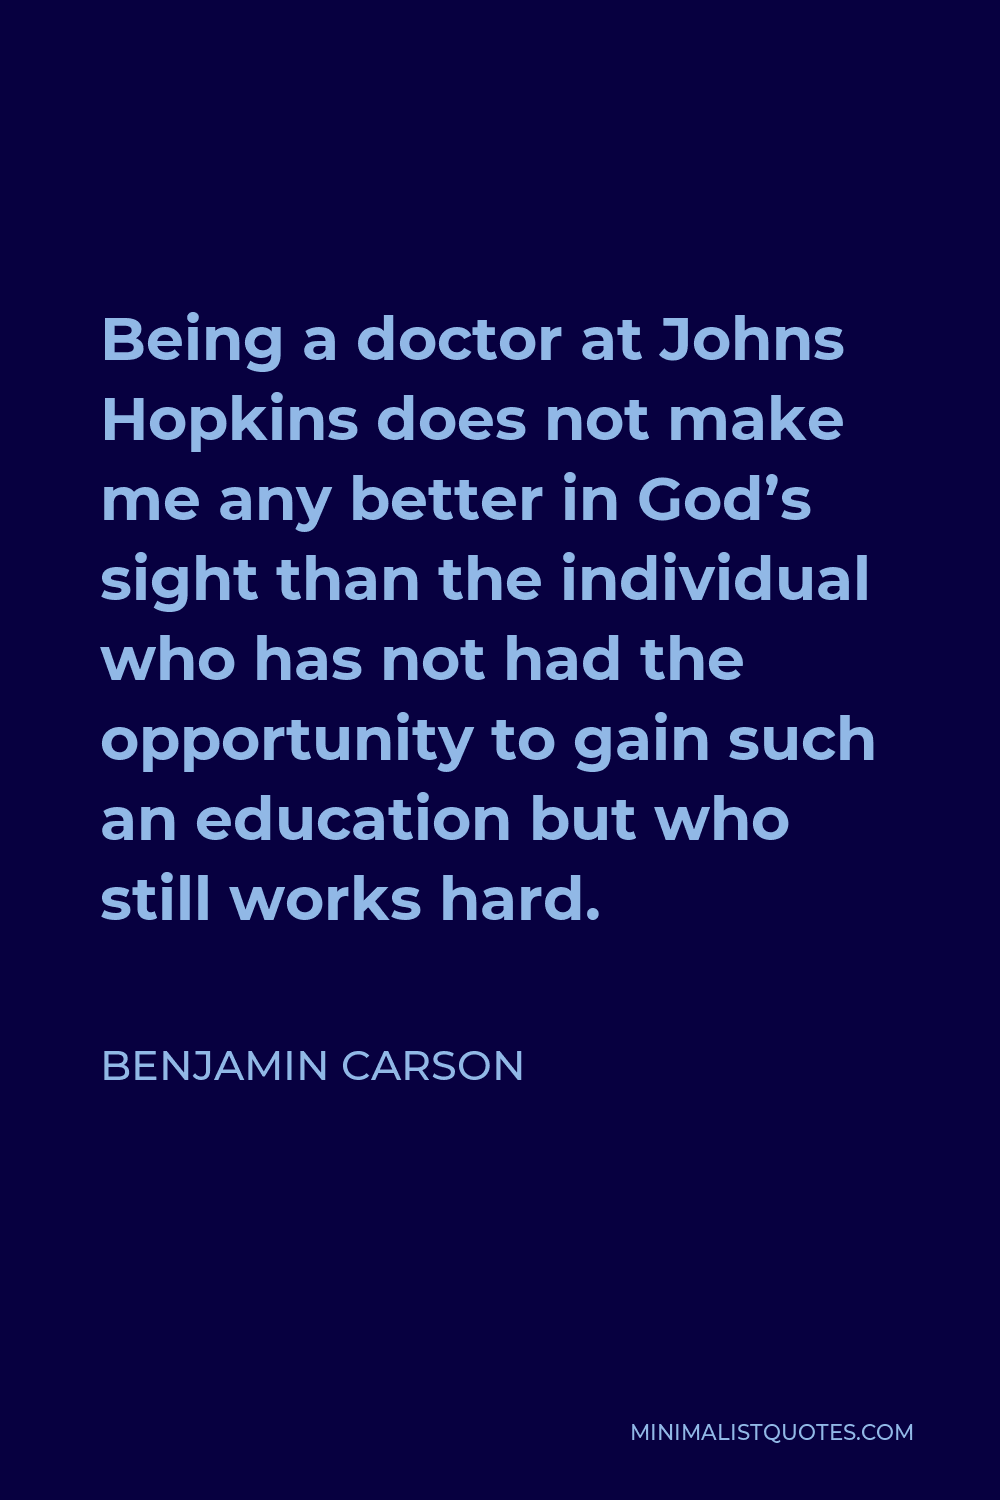 Benjamin Carson Quote - Being a doctor at Johns Hopkins does not make me any better in God’s sight than the individual who has not had the opportunity to gain such an education but who still works hard.